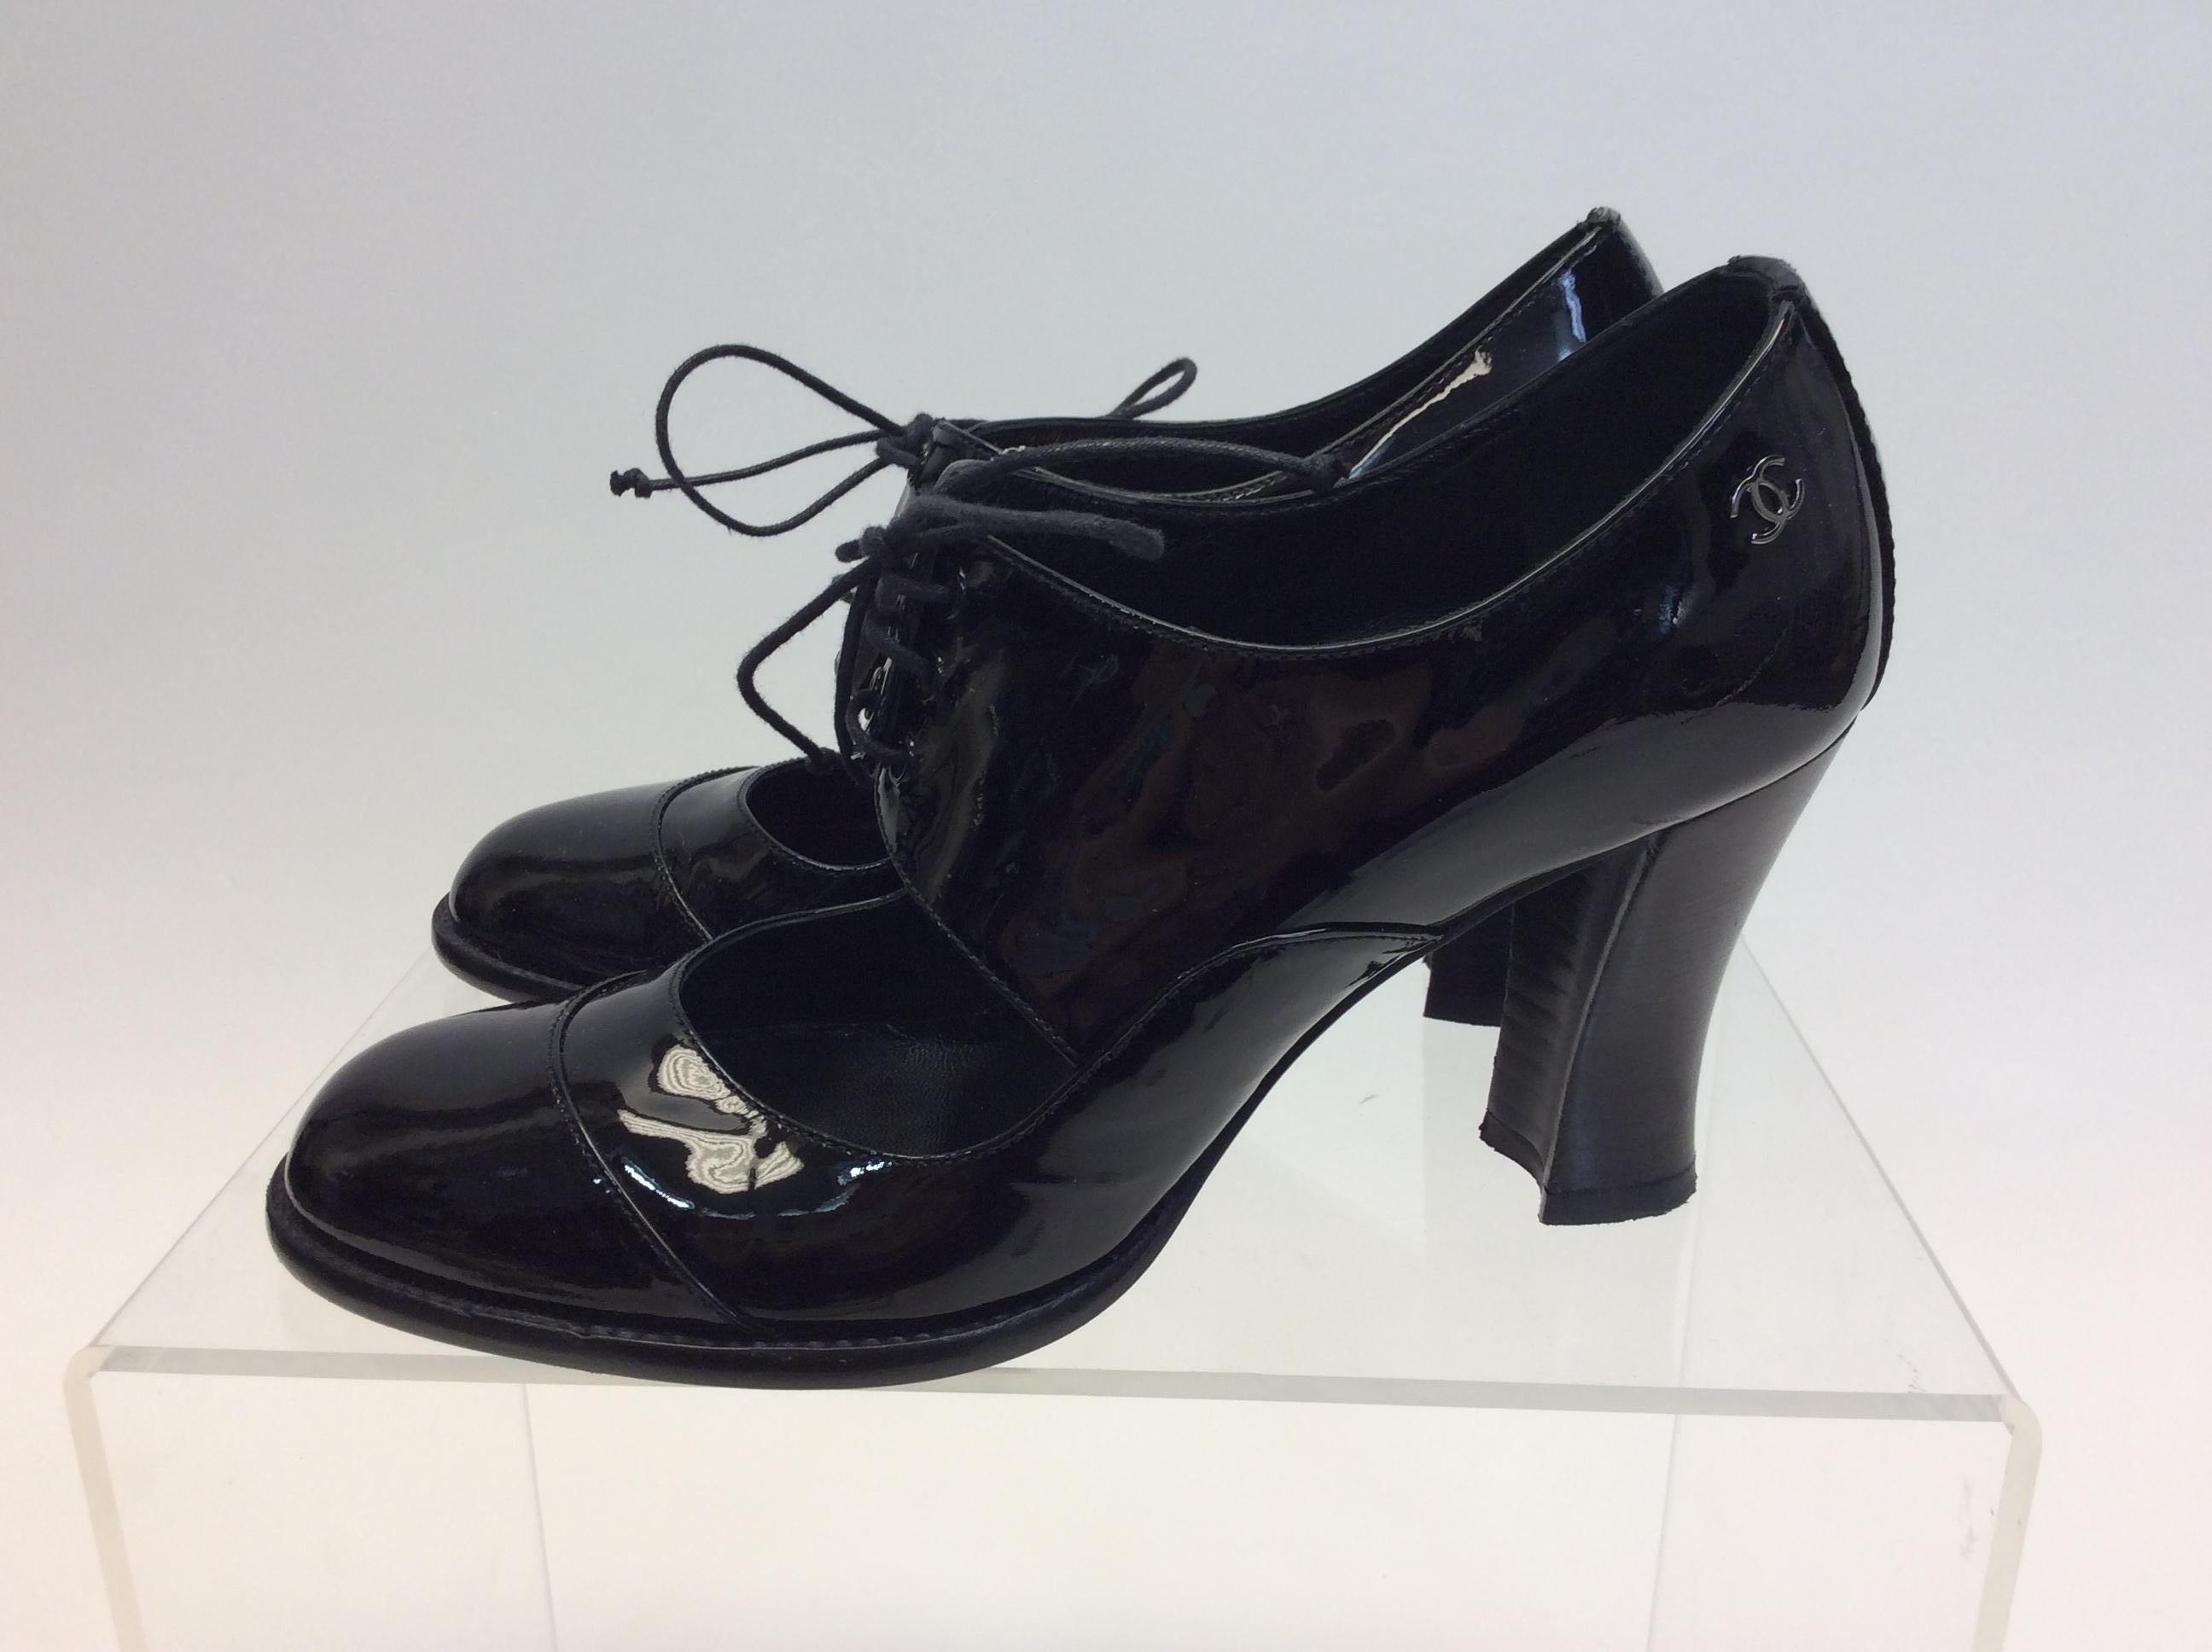 Chanel Black Patent Leather 'Mary Jane' Heels In Good Condition For Sale In Narberth, PA